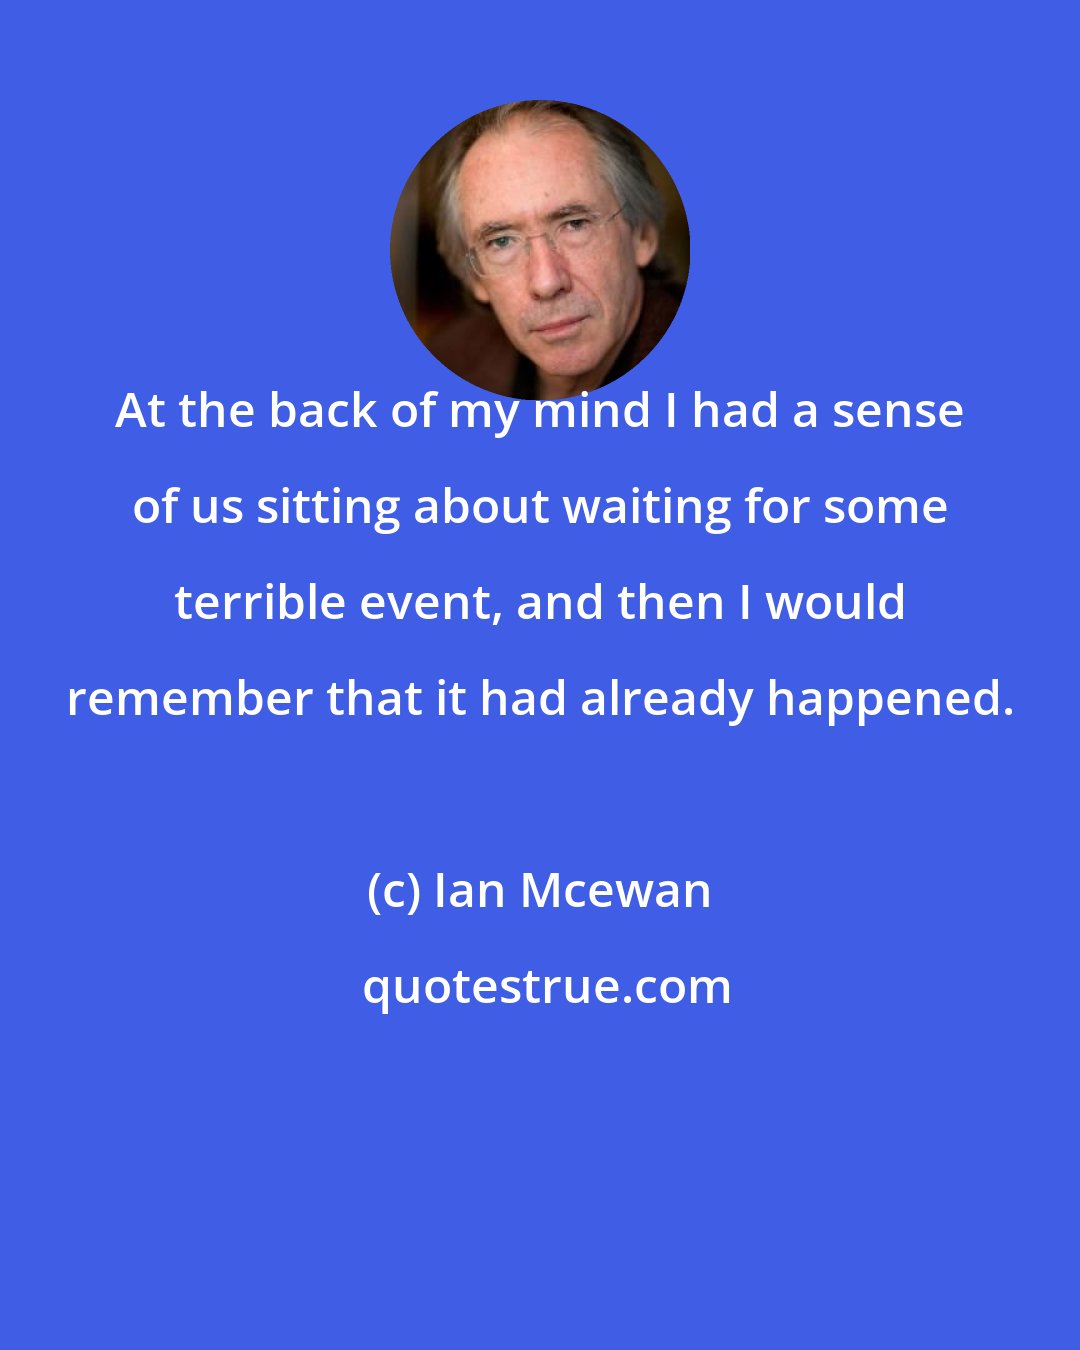 Ian Mcewan: At the back of my mind I had a sense of us sitting about waiting for some terrible event, and then I would remember that it had already happened.